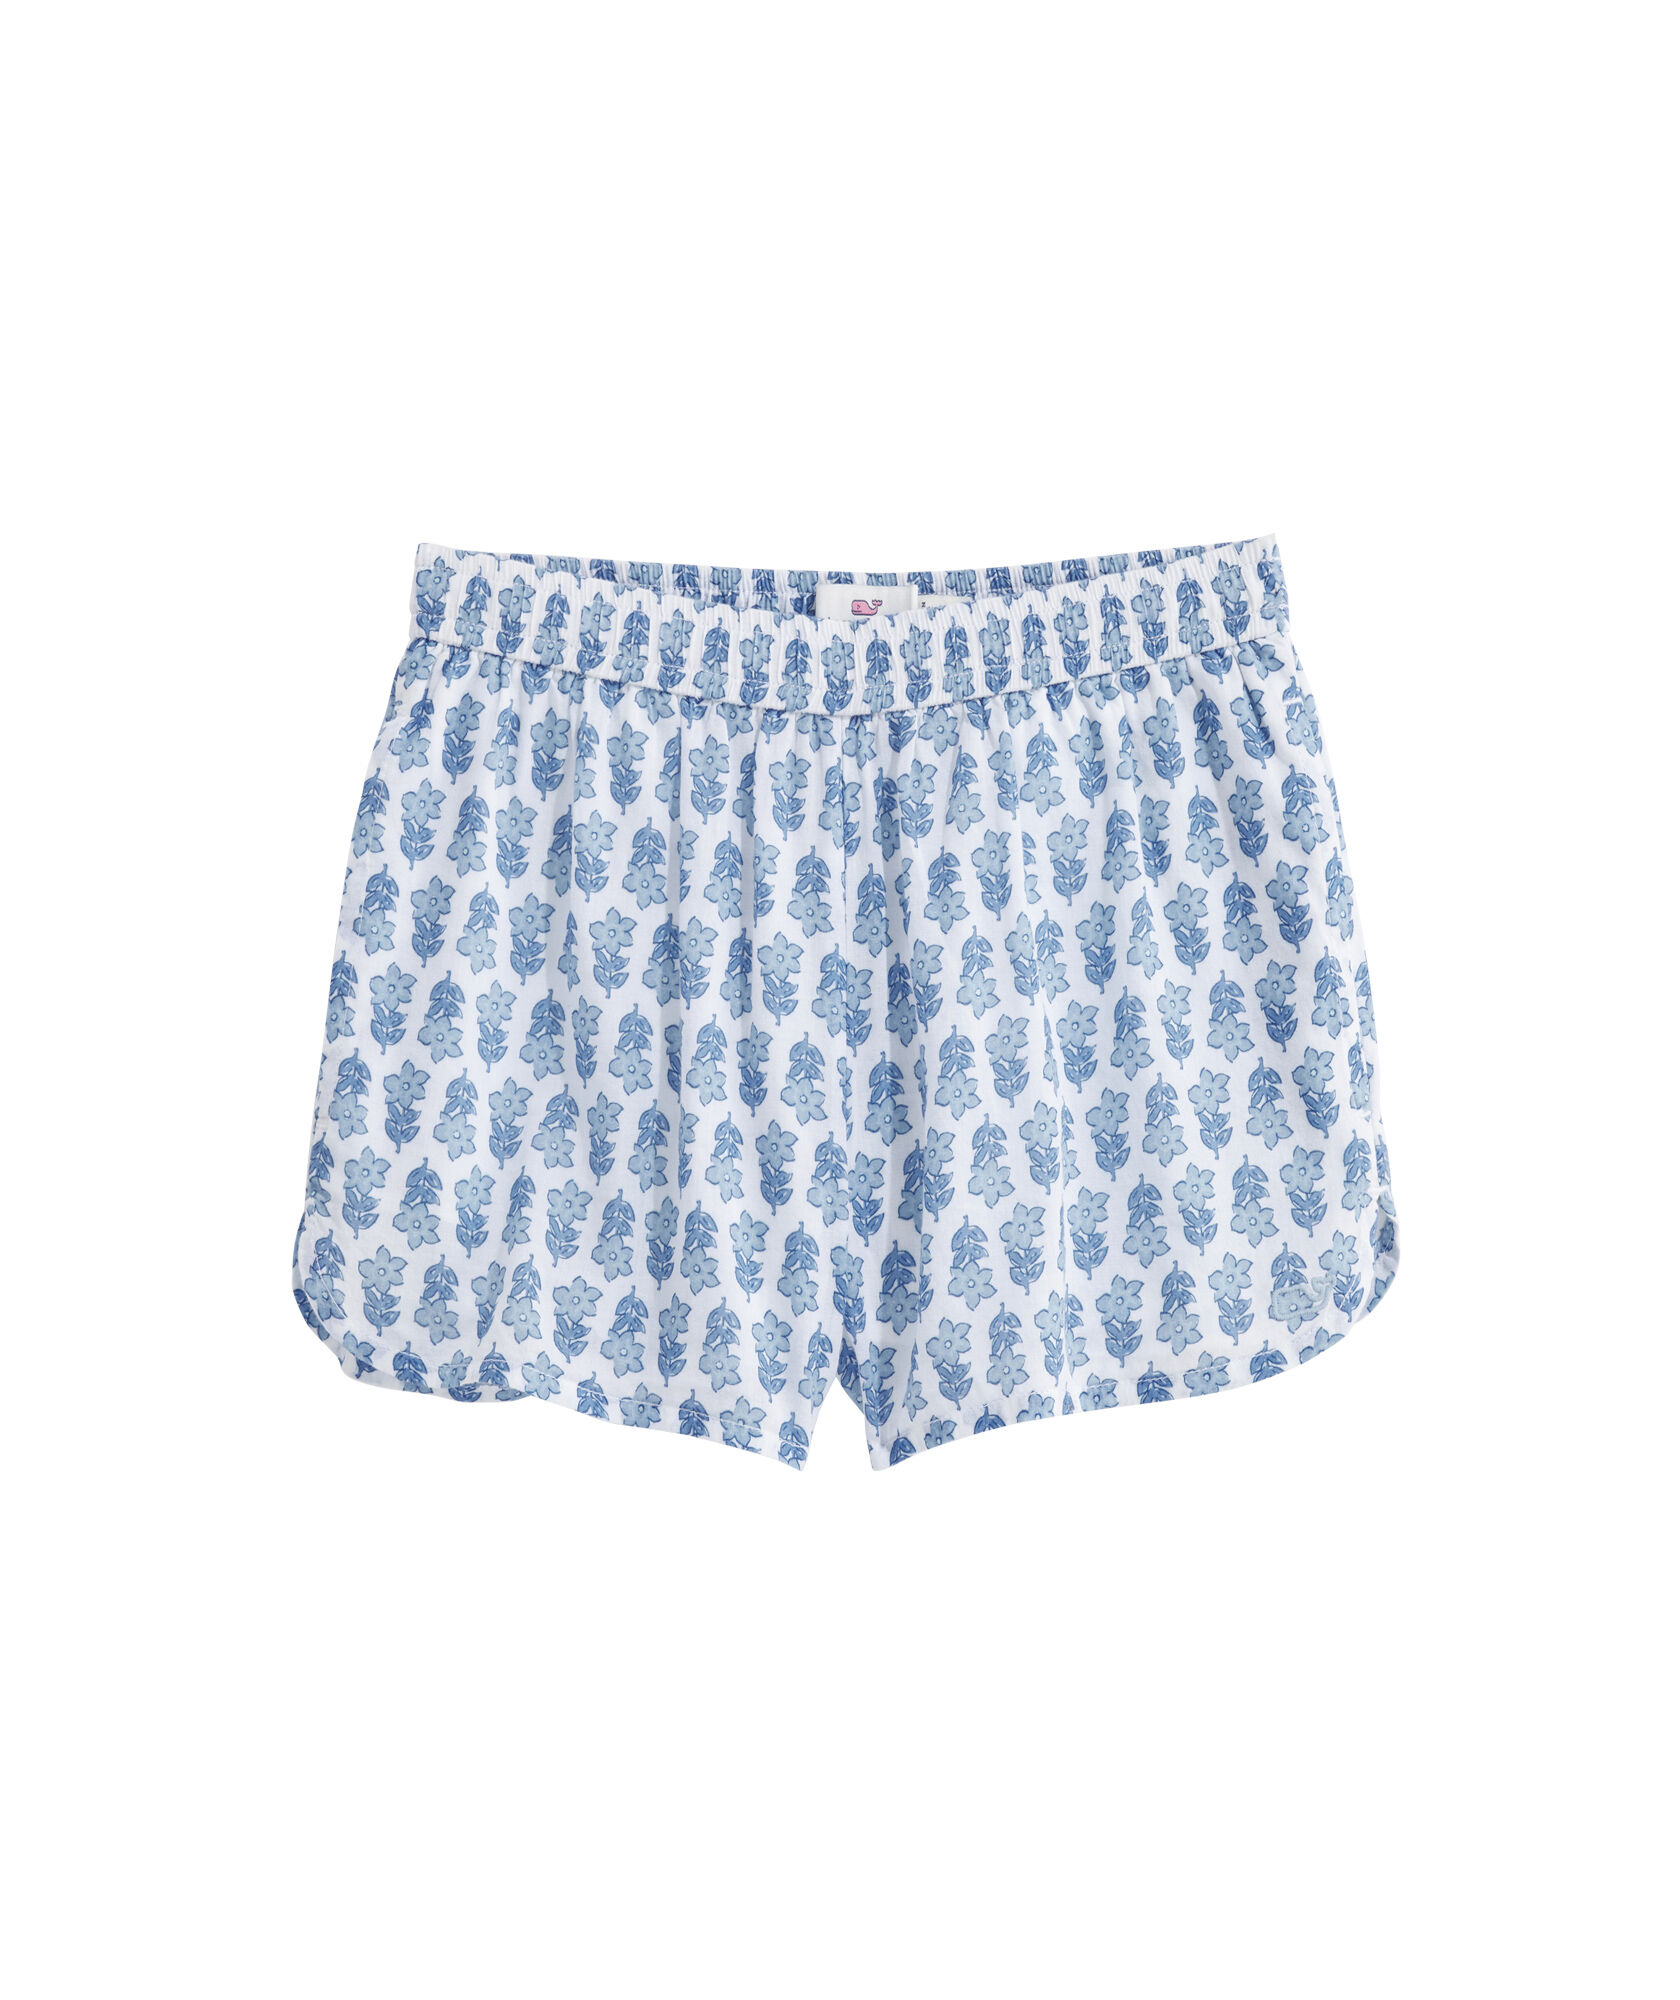 OUTLET Girls' Seastitch Floral Print Pull-On Shorts